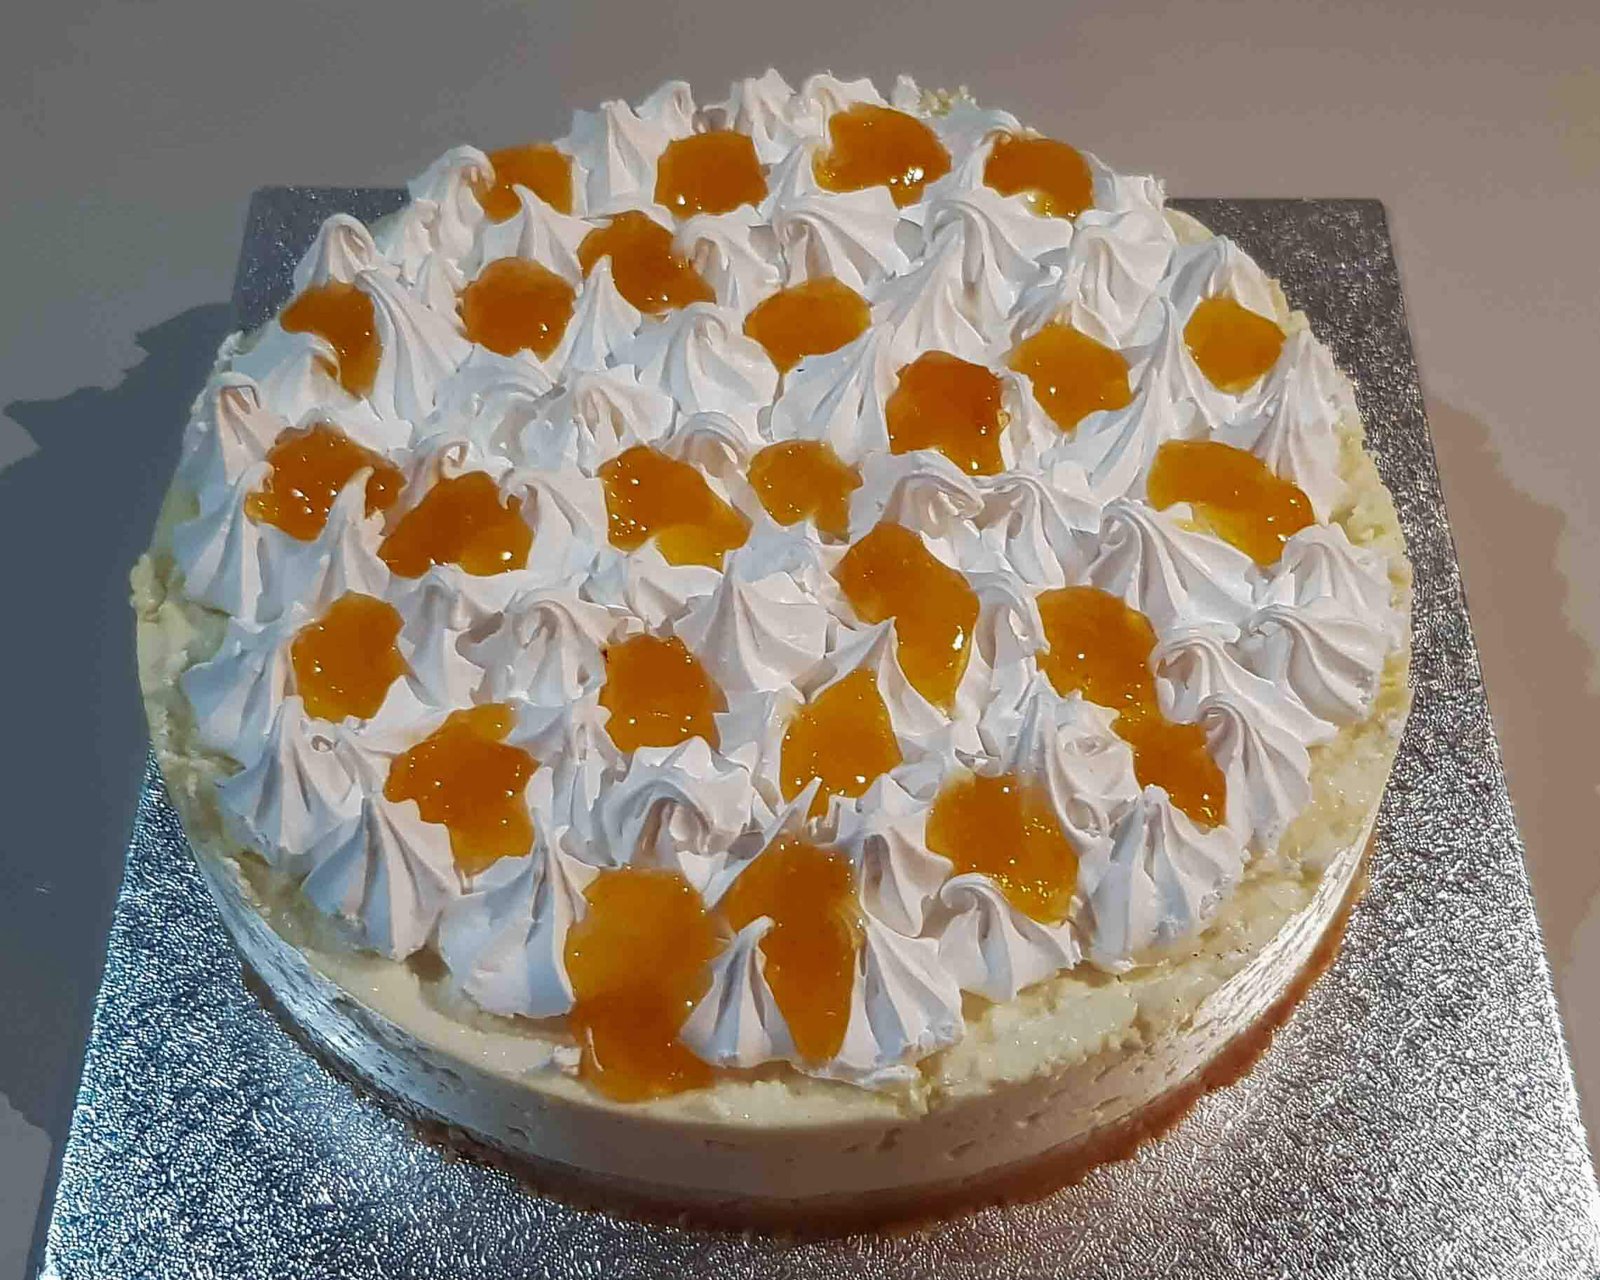 Baked meringue cheesecake with apricot jam